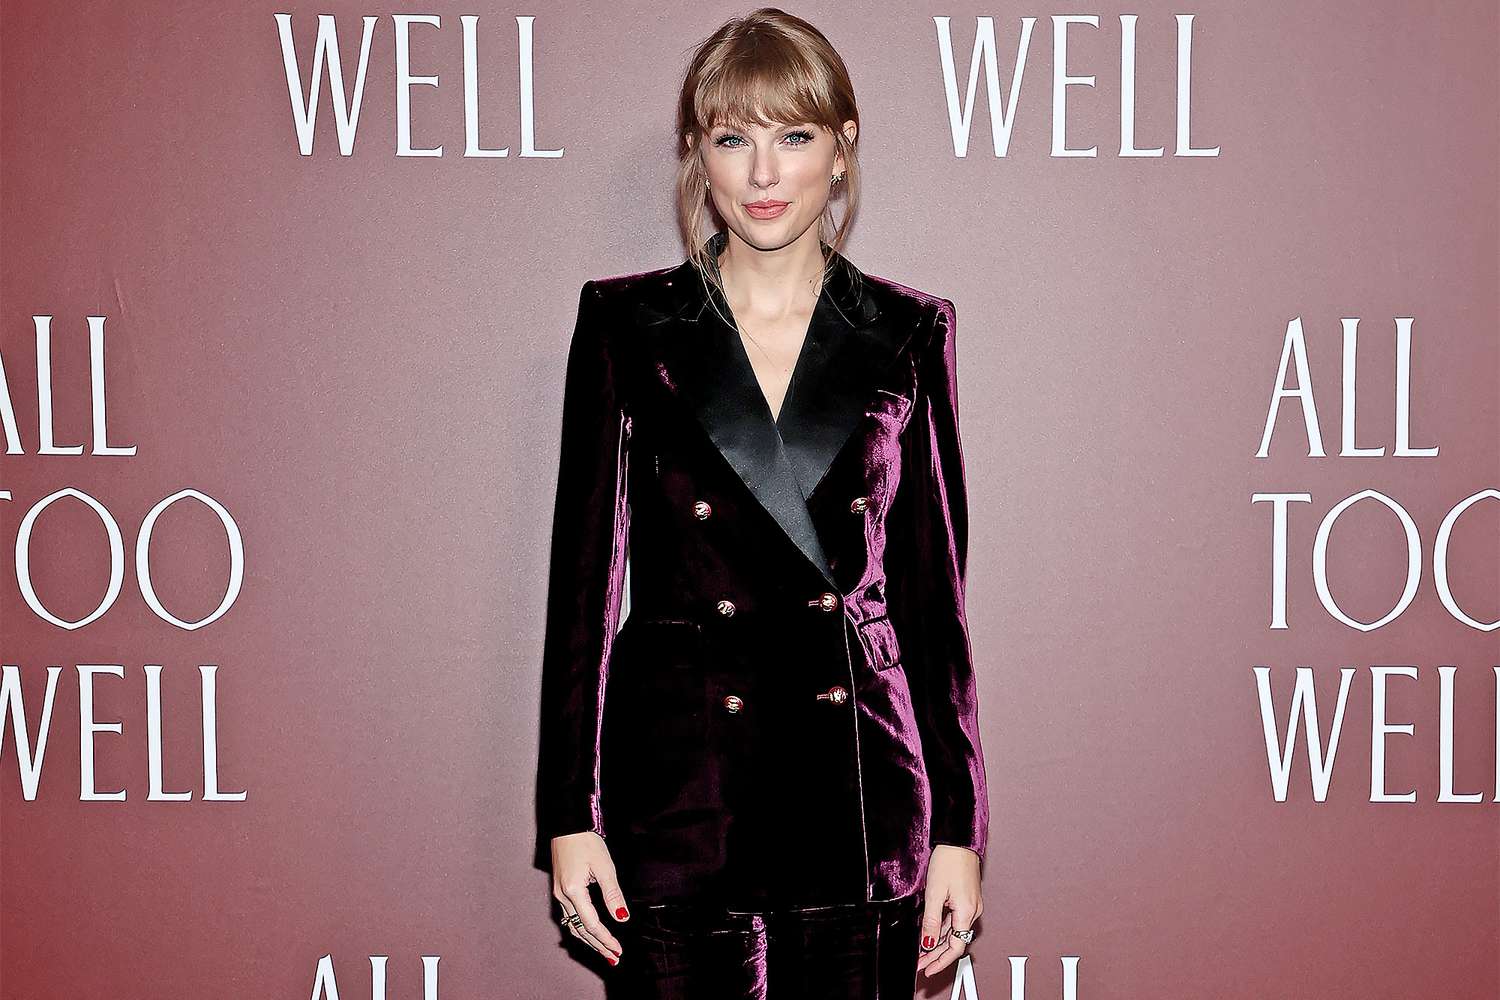 NEW YORK, NEW YORK - NOVEMBER 12: Taylor Swift attends the "All Too Well" New York Premiere on November 12, 2021 in New York City. (Photo by Dimitrios Kambouris/Getty Images)